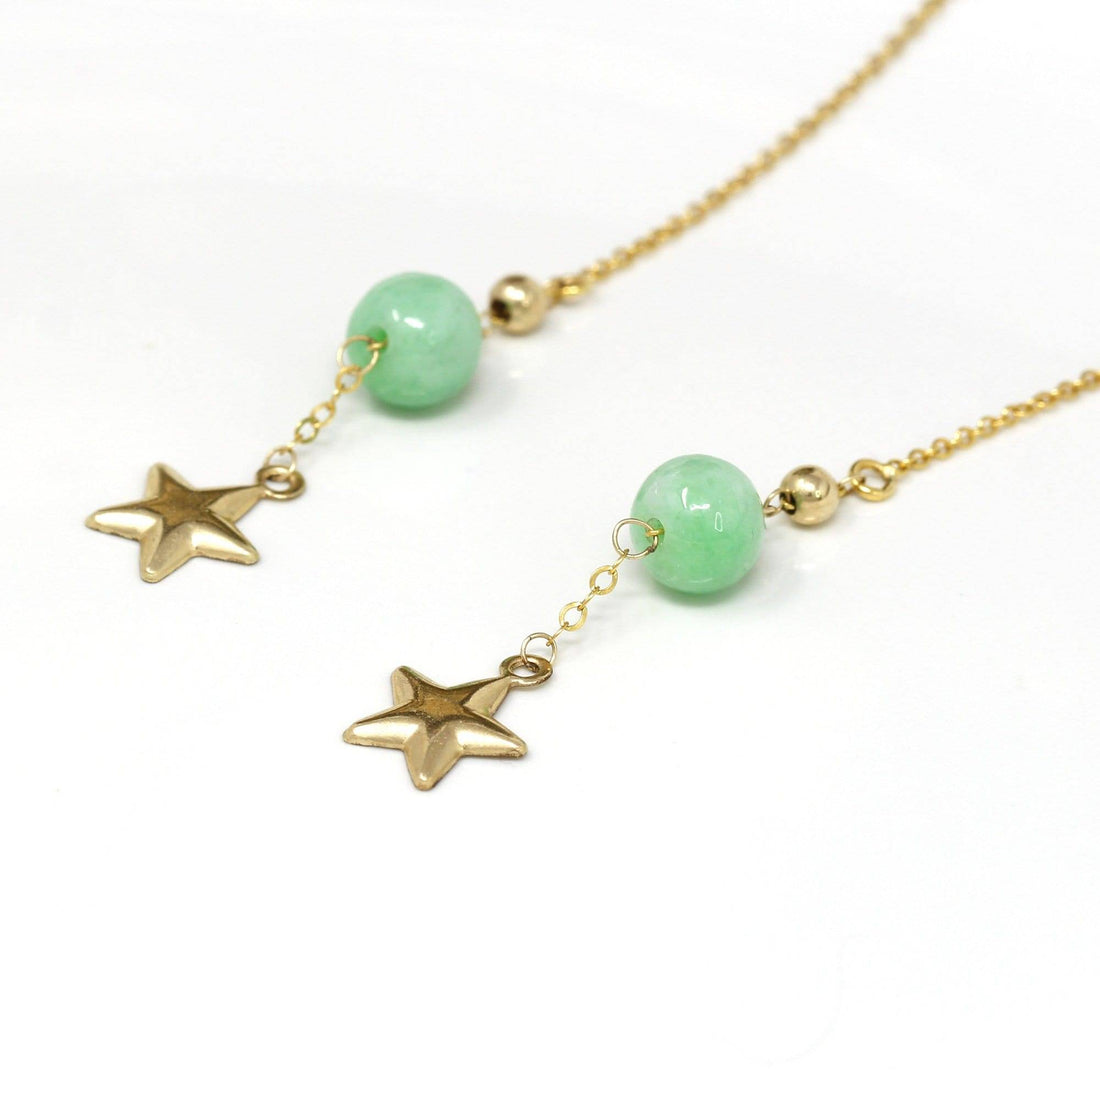 Baikalla Jewelry Gold Jade Earrings Baikalla™ "You are the brightest star to me" 14K Royal Yellow Gold Genuine Jade Jadeite Beads and Gold Star Longer Earrings